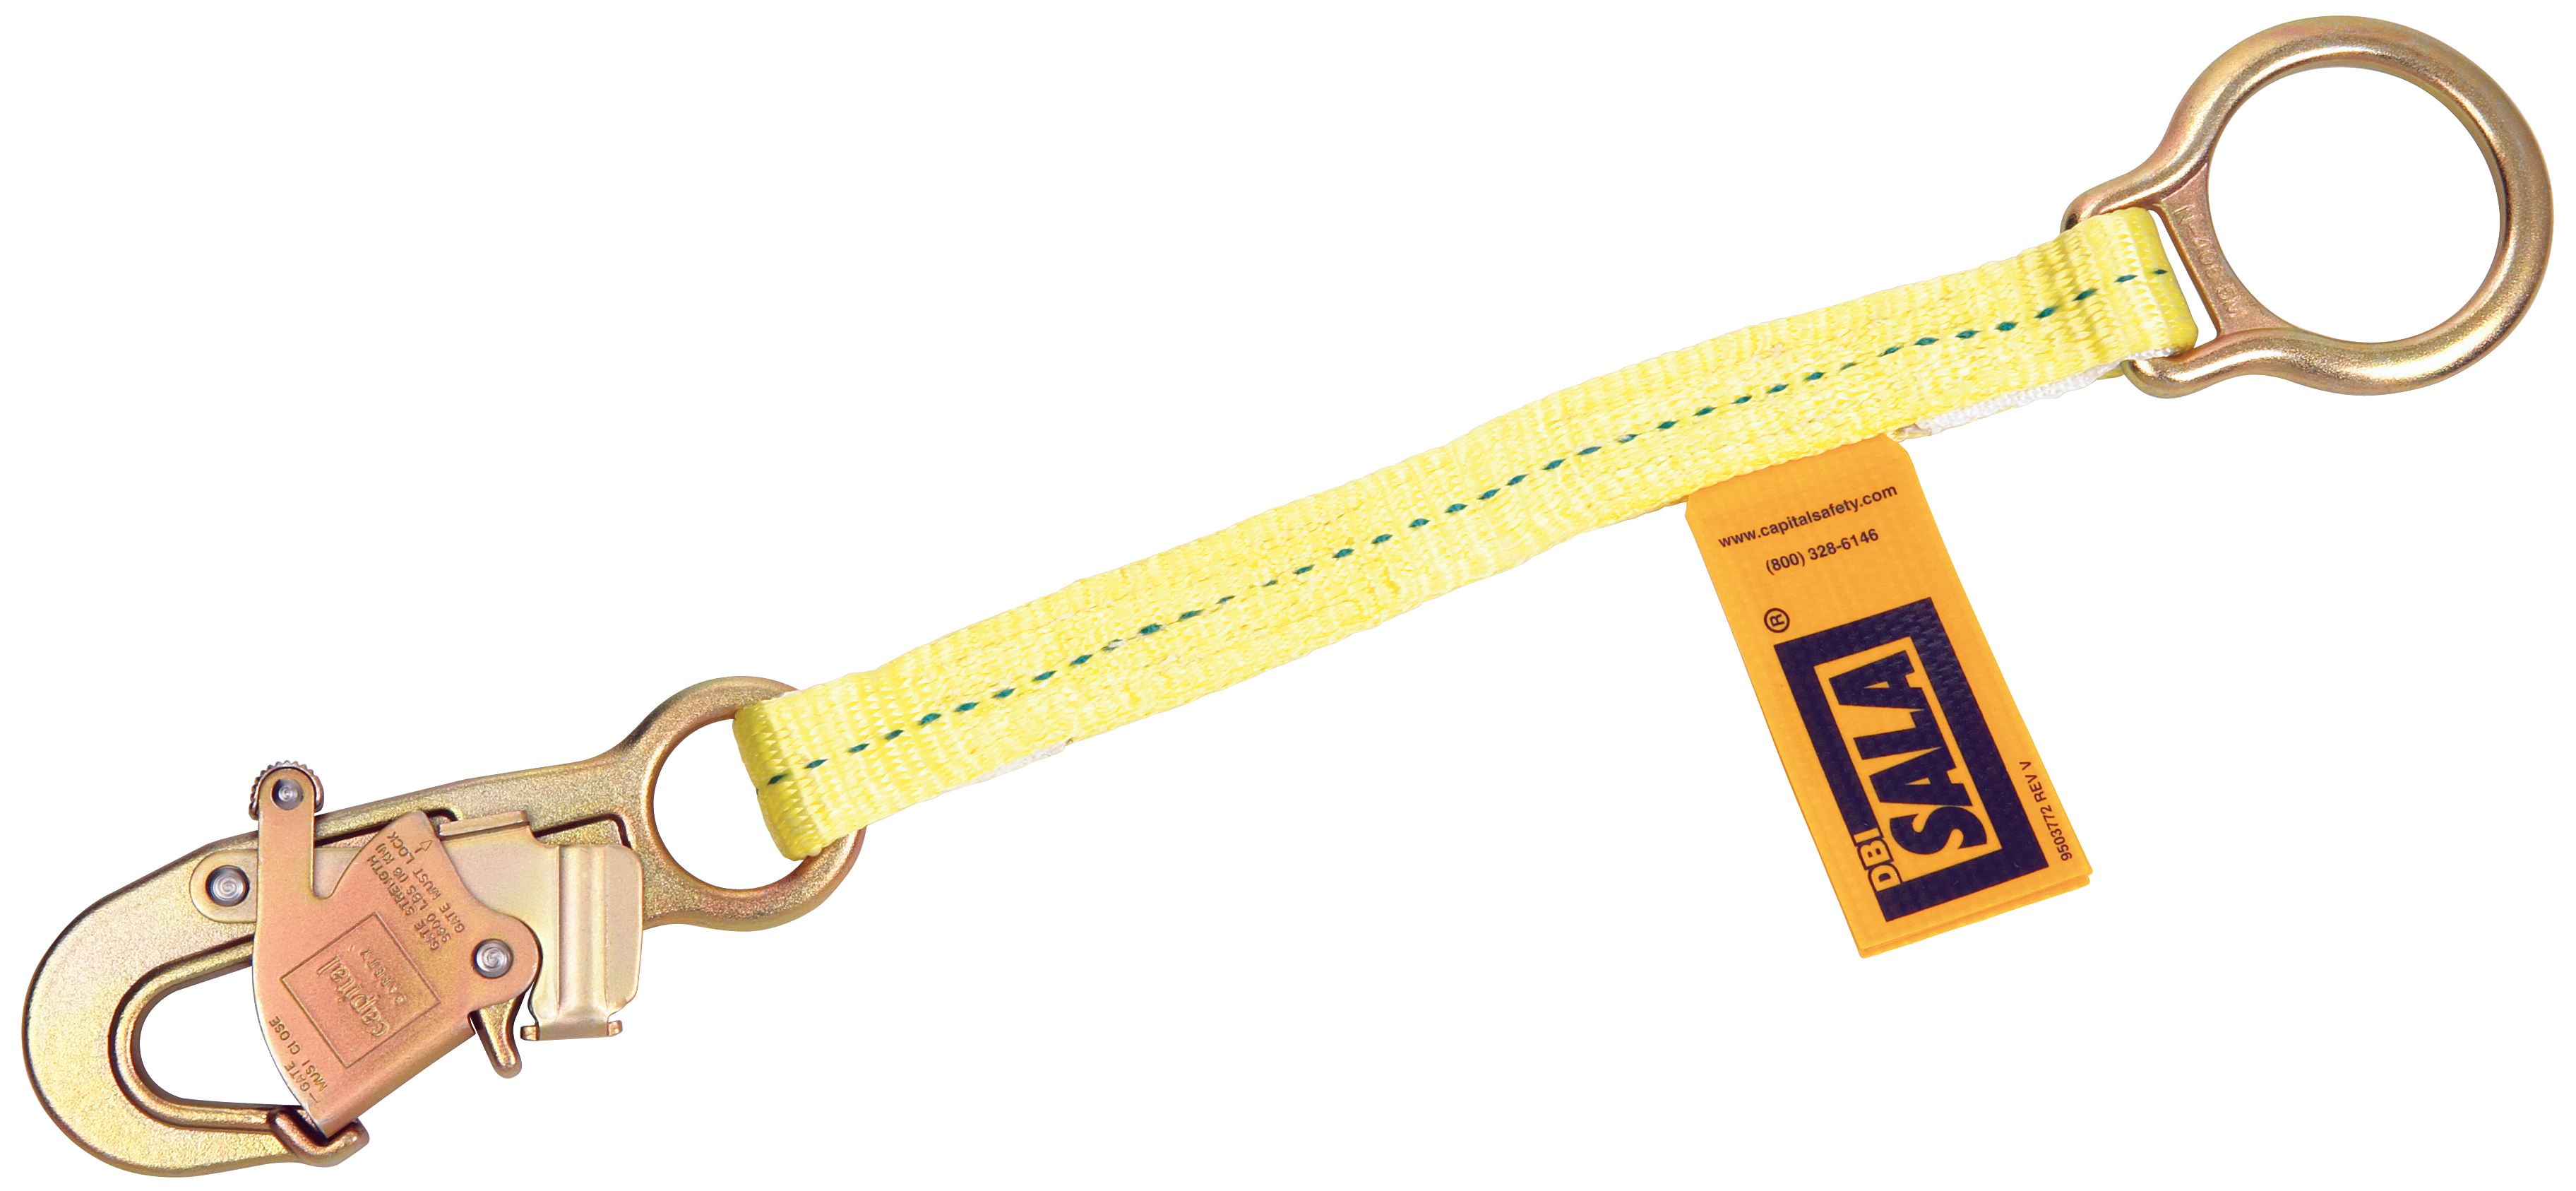 25411 18cm Lanyard with 2 Snap Hooks